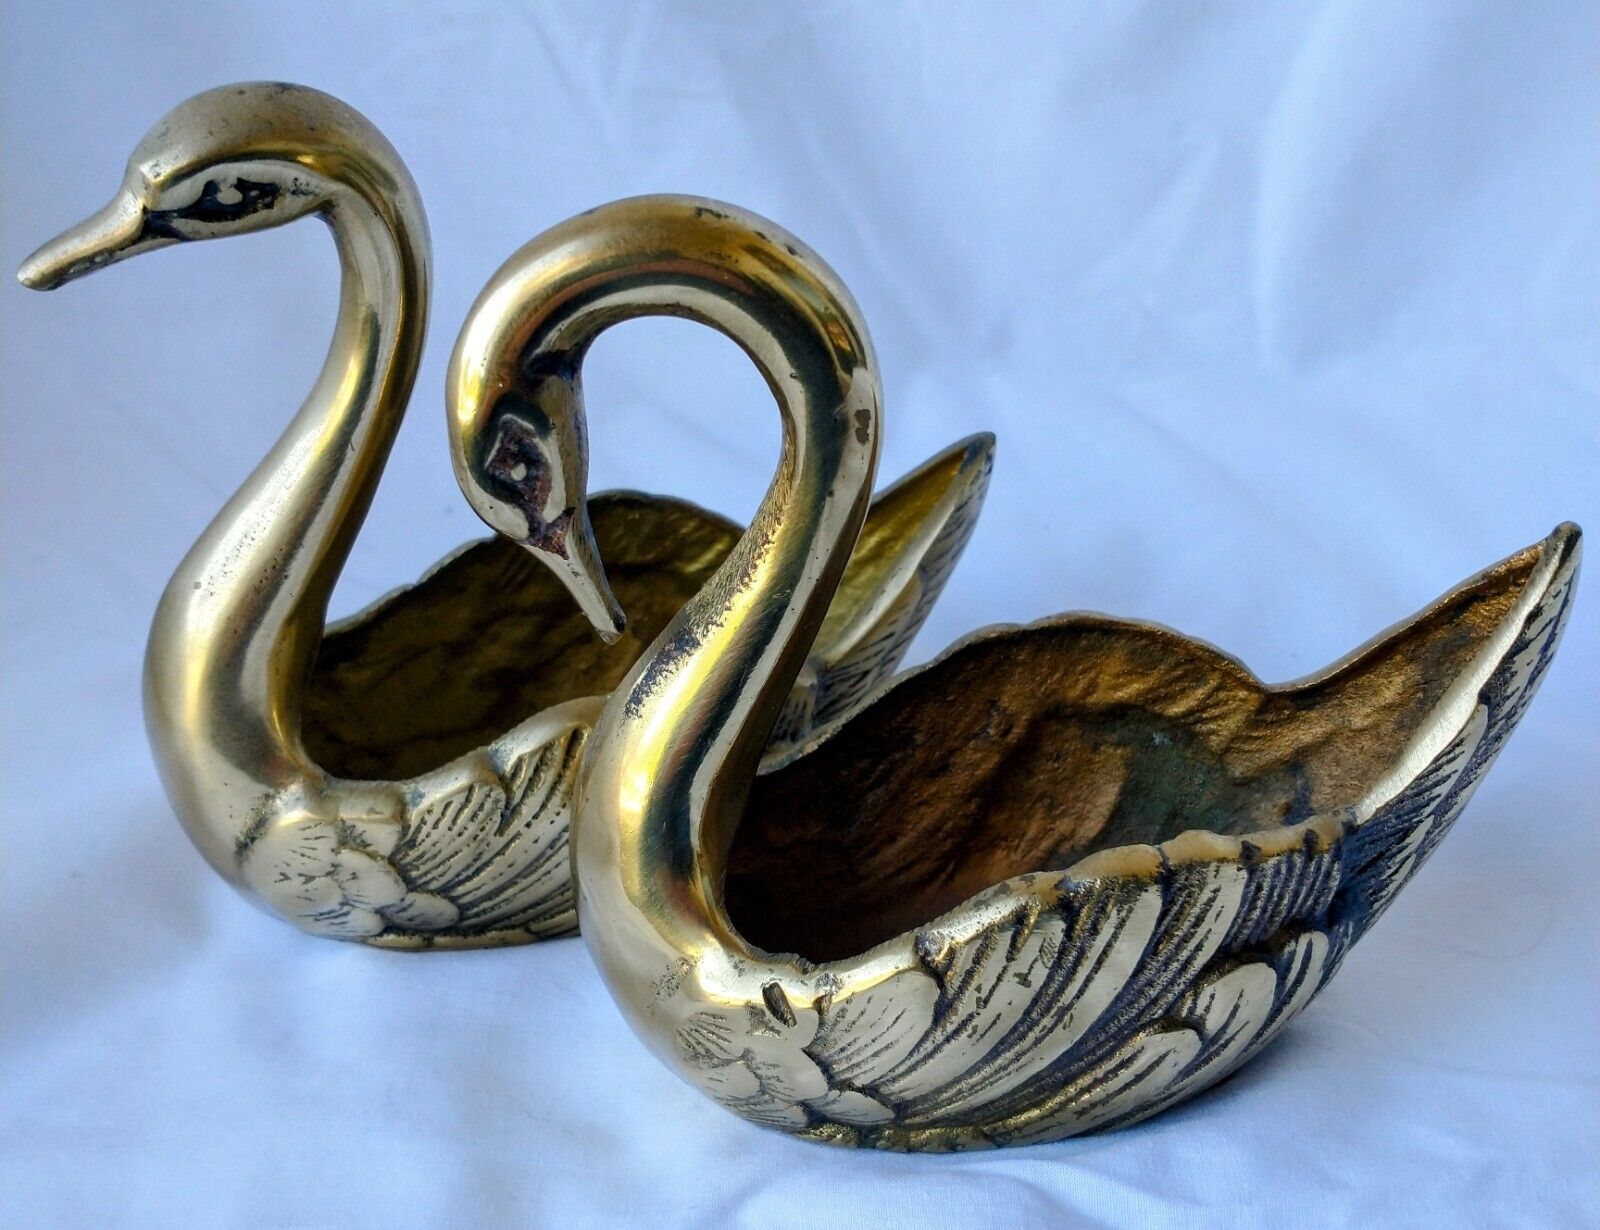 Vintage Brass Curved Neck Swan Pair, Trinket Dish or Planter, Made in Korea 